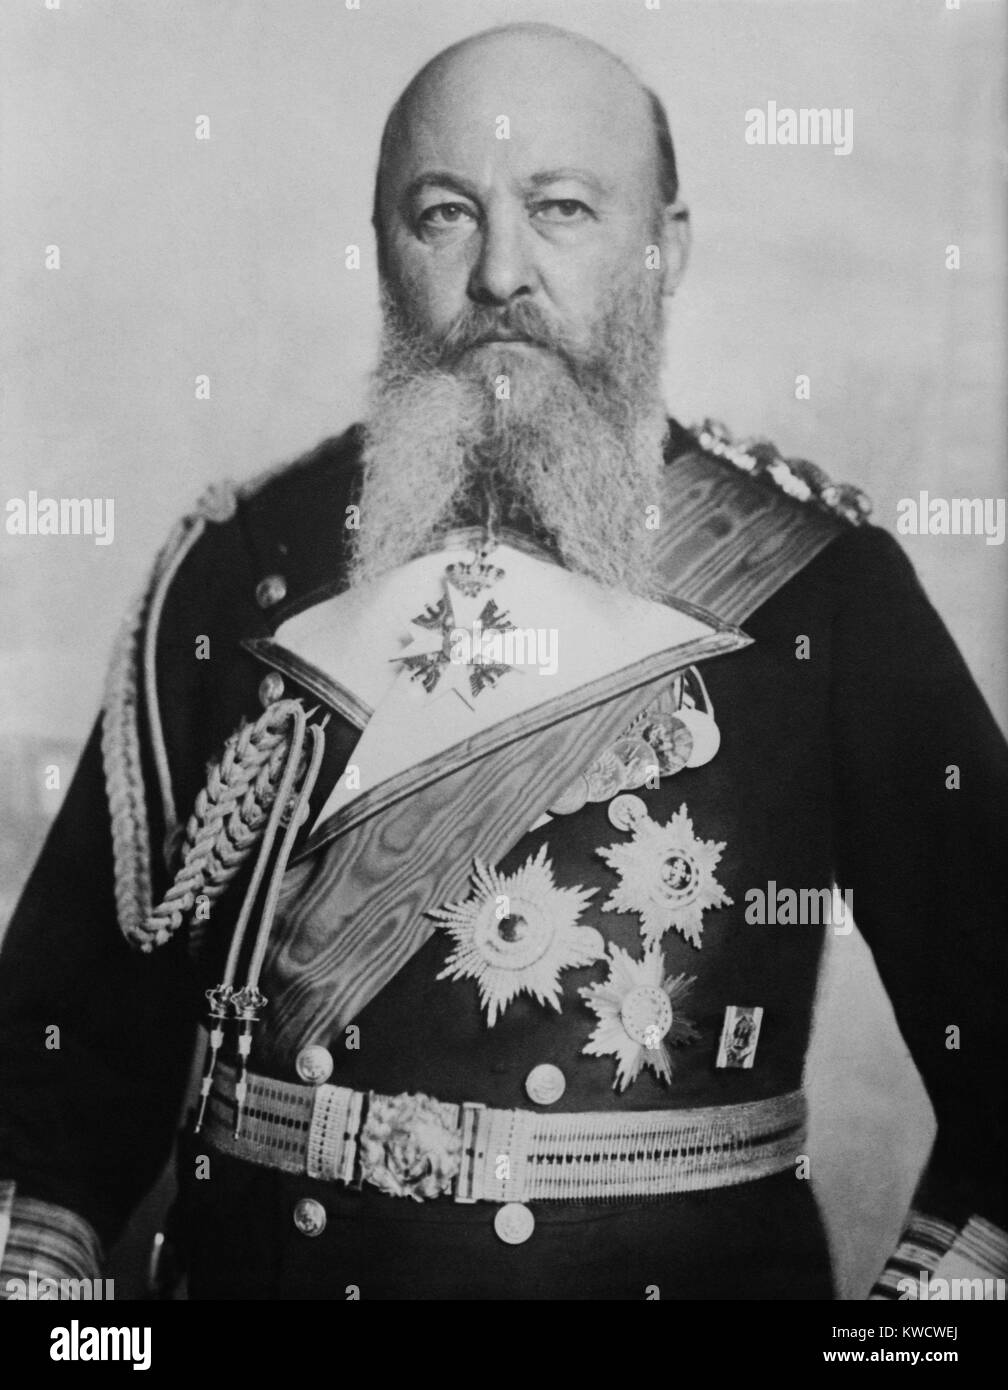 Admiral Alfred von Tirpitz, c. 1915, enlarged the German Navy to a strength that threatened Britain. The British-German naval arms race is considered one of the causes of World War 1 (BSLOC 2017 1 10) Stock Photo